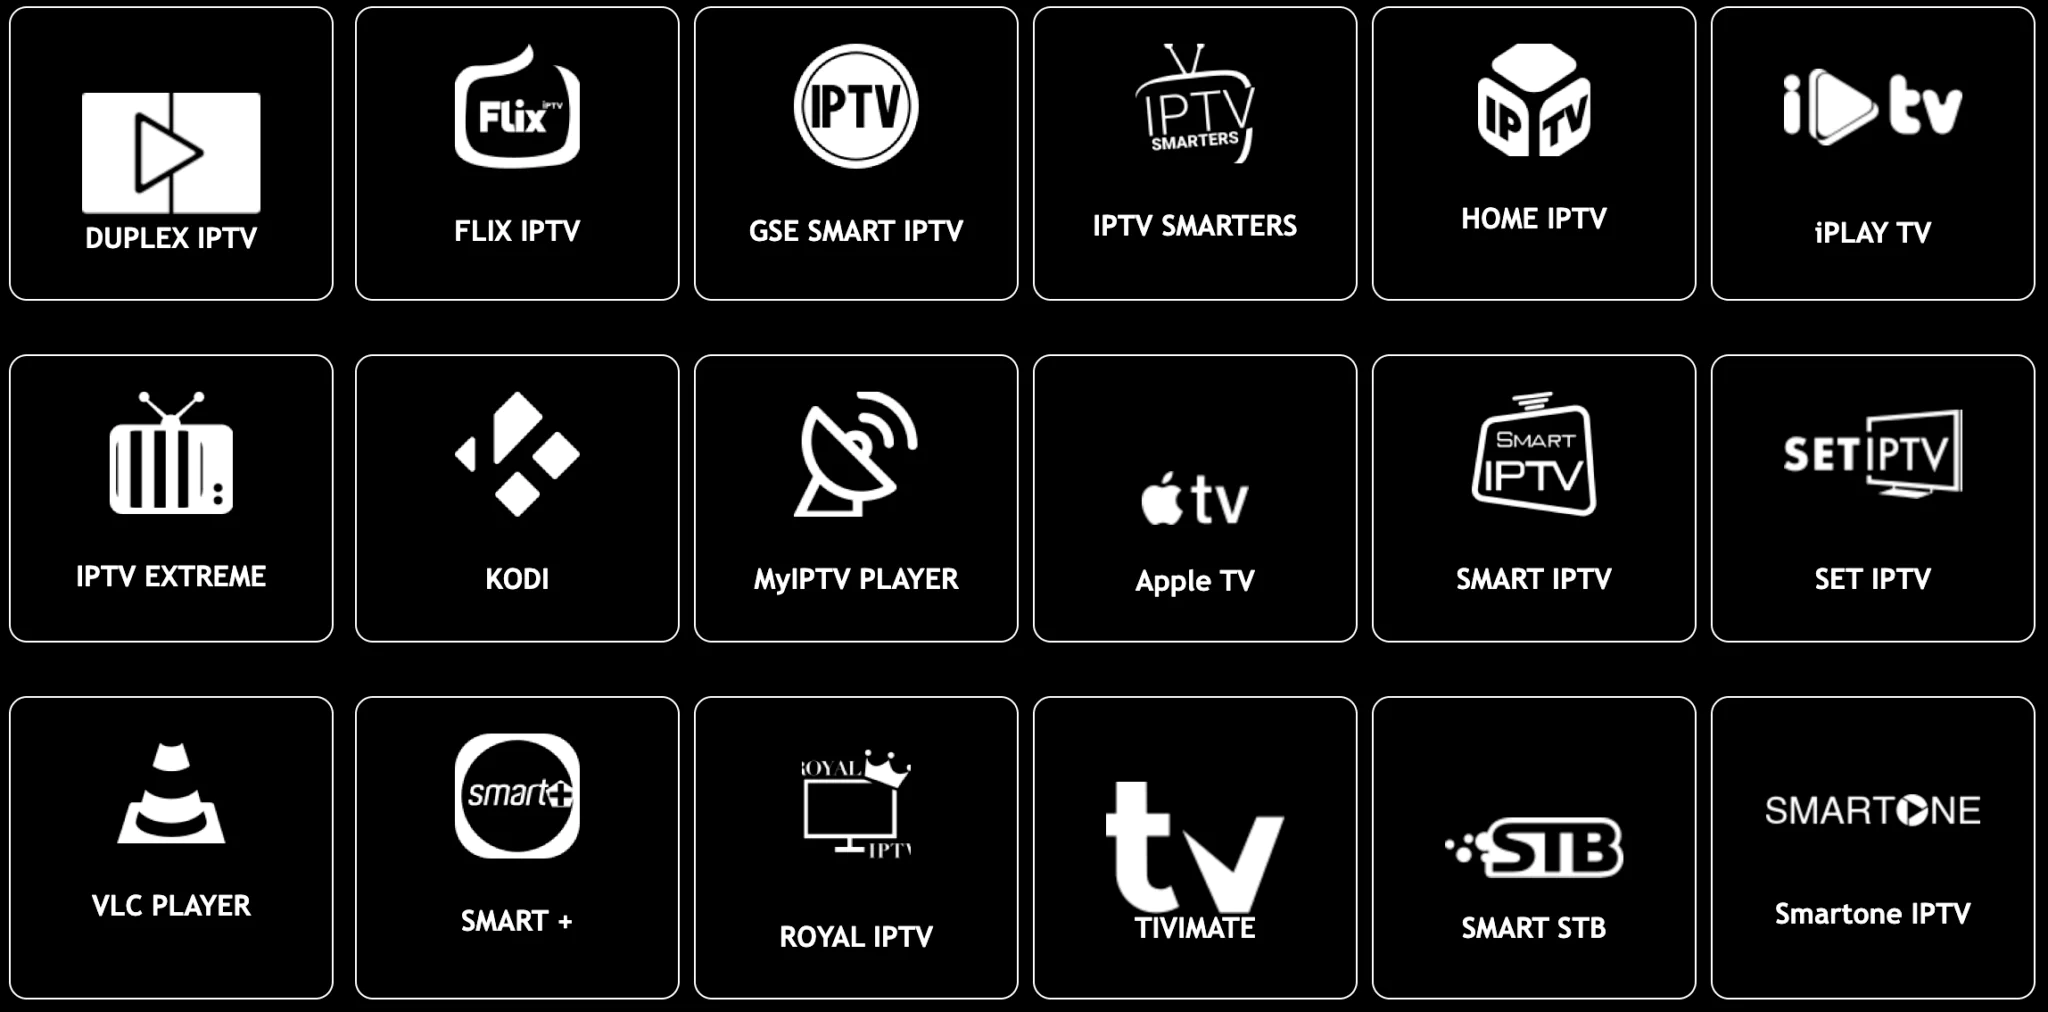 IPTV service across all devices